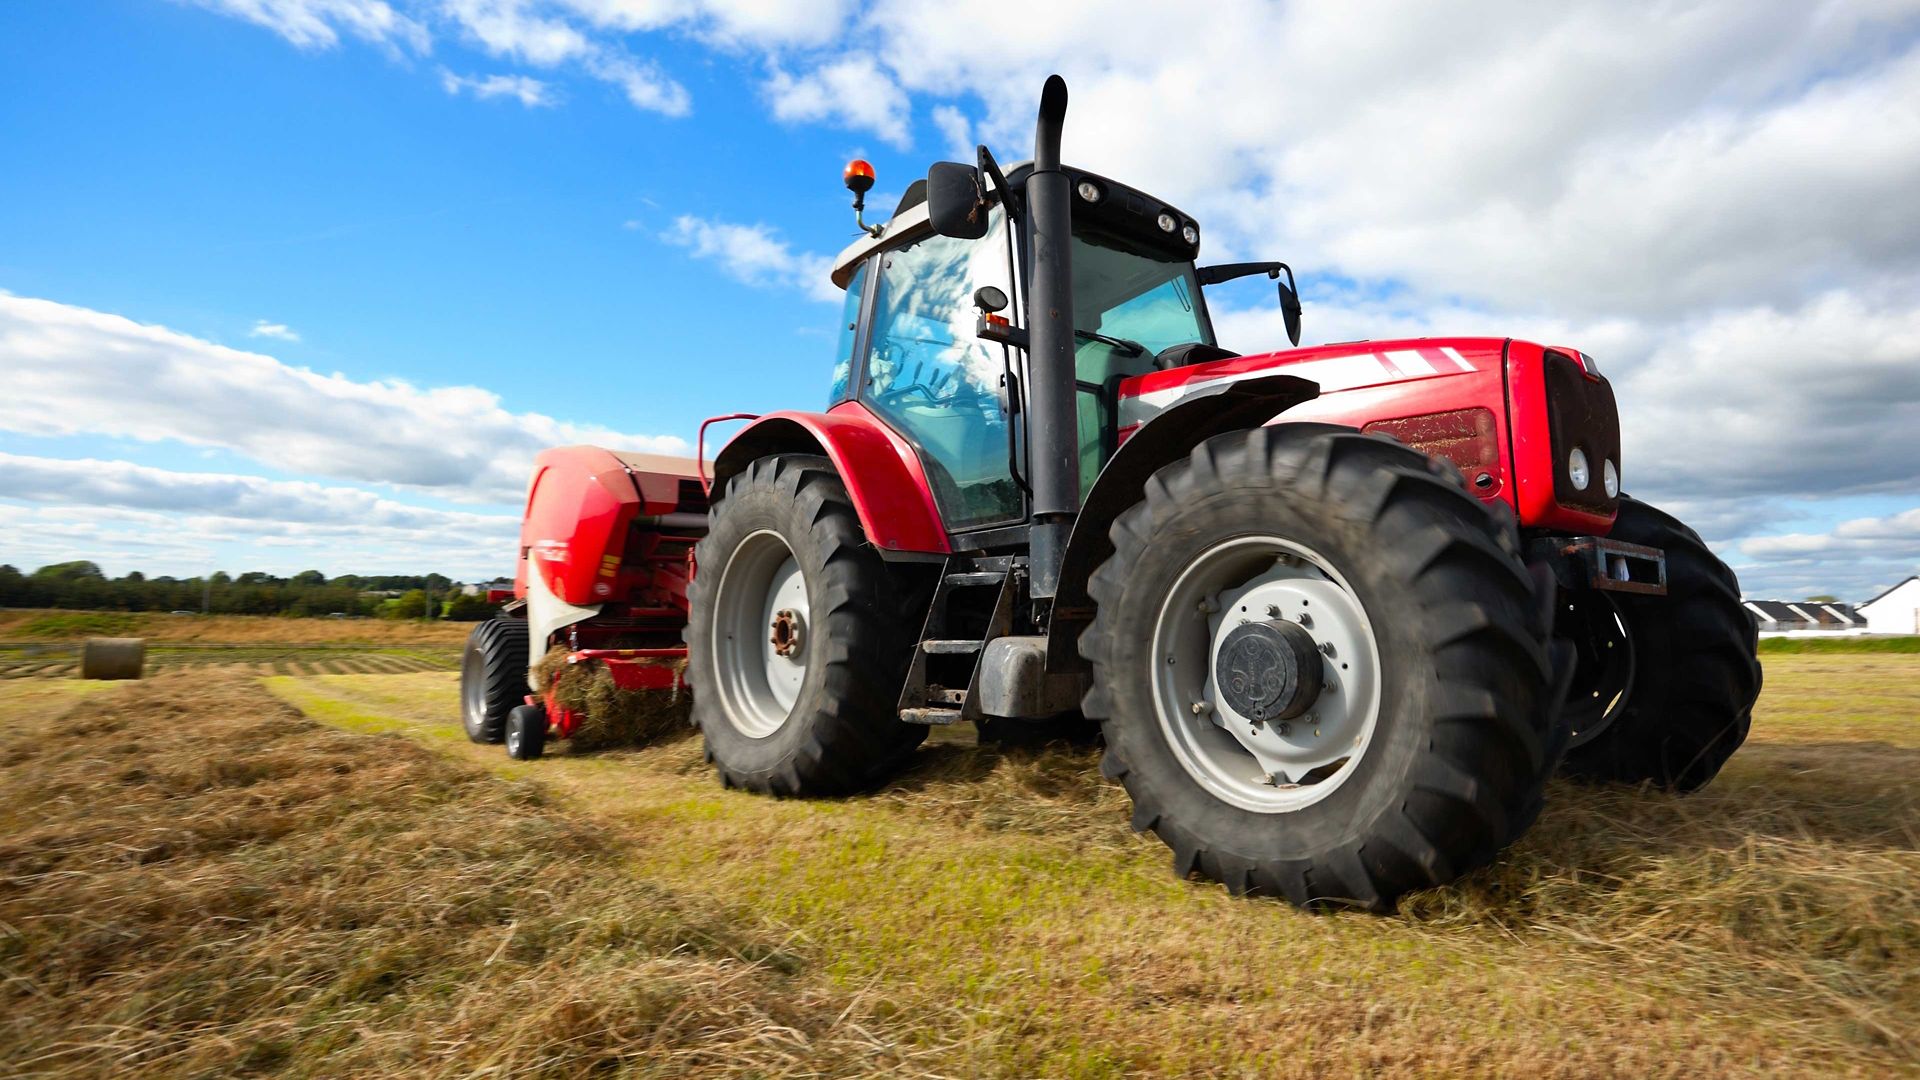 farm tractor in field with clouds in background; agricultural vehicle in farm field